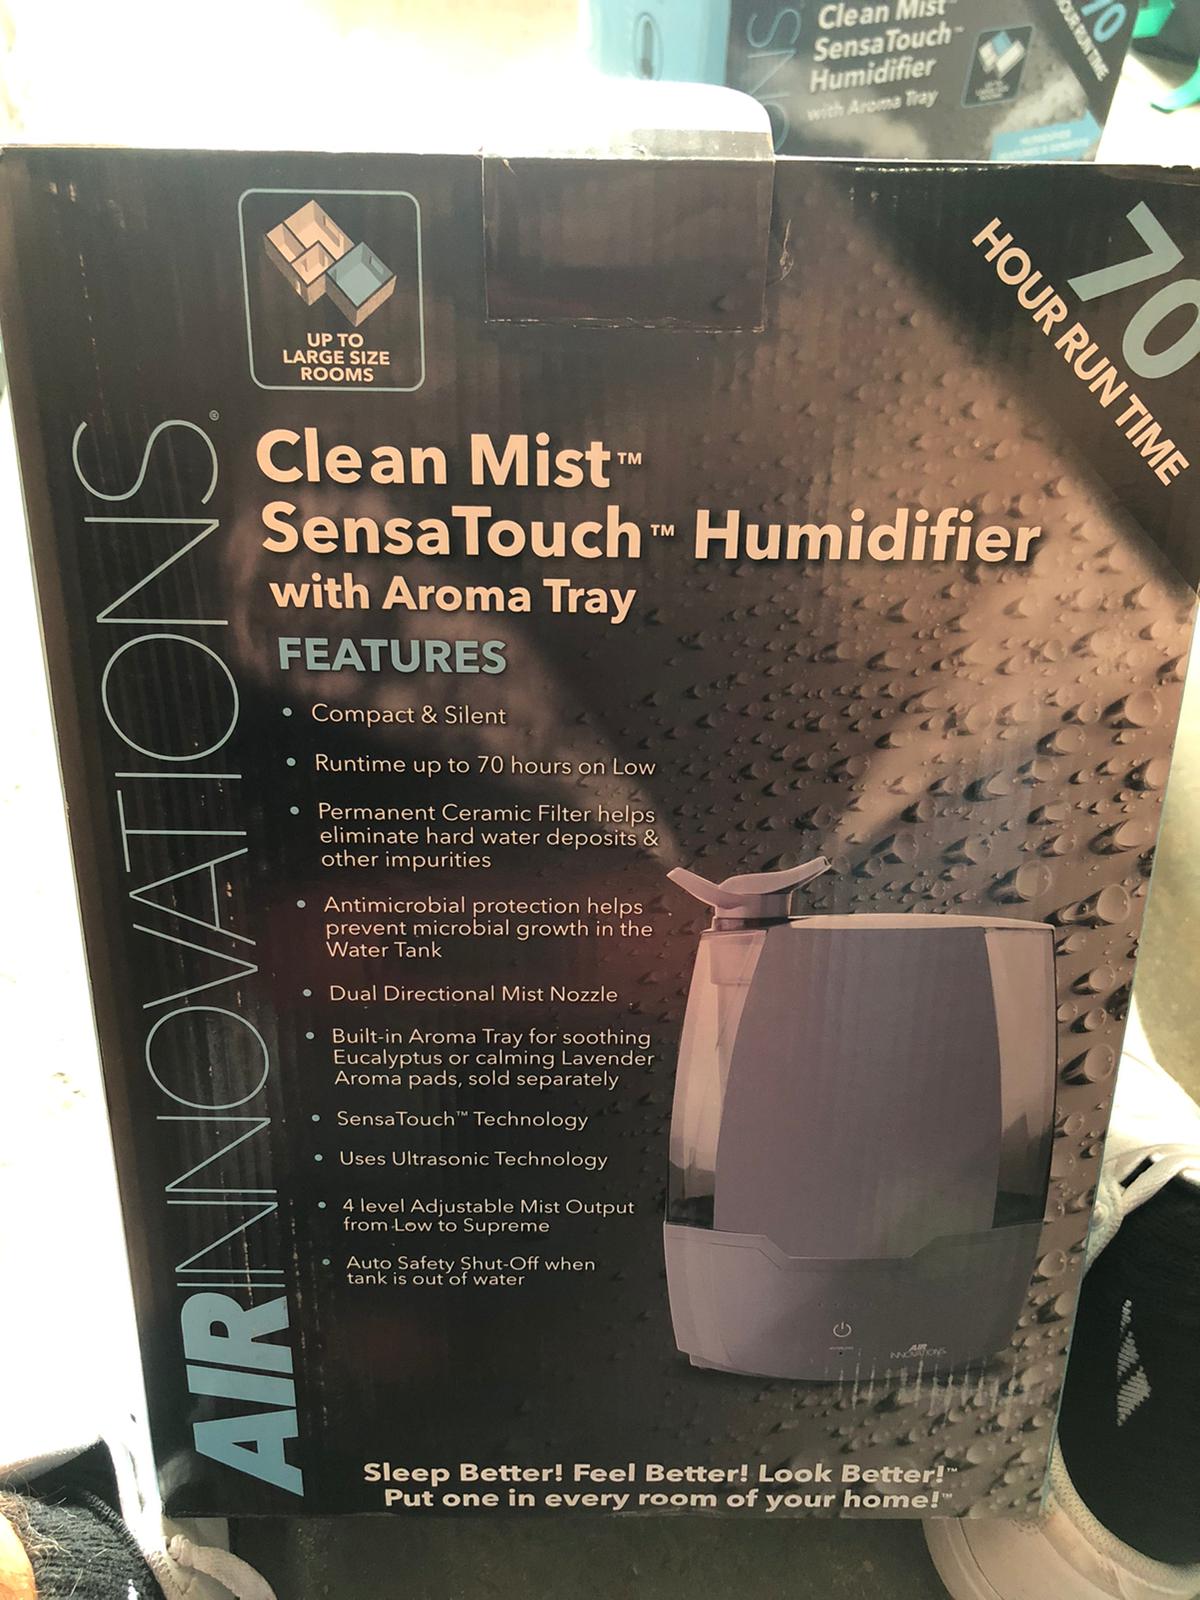 Air Innovations Clean Mist Humidifier with Sensa Touch and Aroma Tray